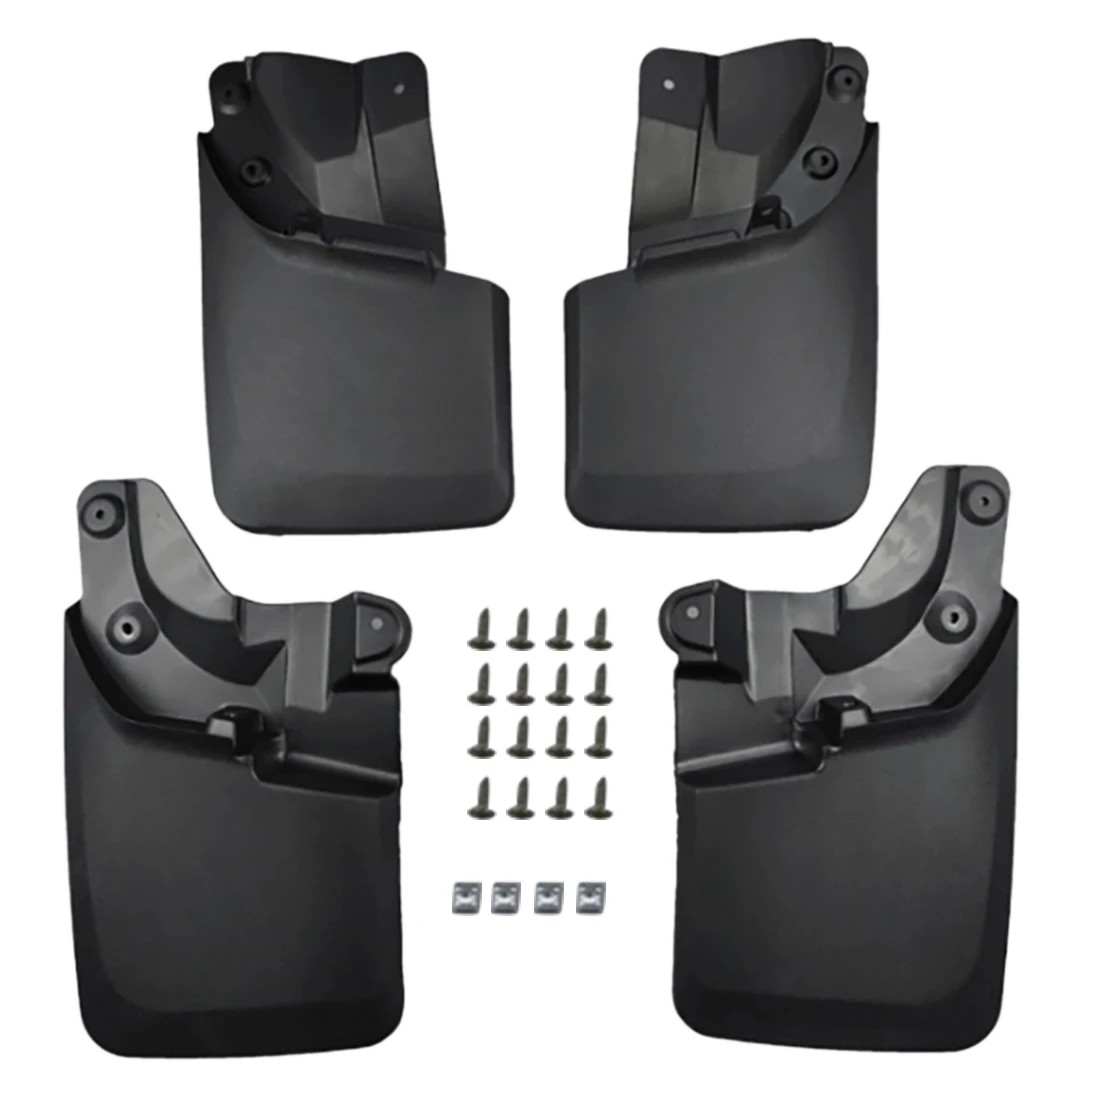 

Fender Auto Parts Protect the Car Mud Flaps Set Car Mud Flap Front Rear Mudguard Splash Guards for Toyota Tacoma 16-21